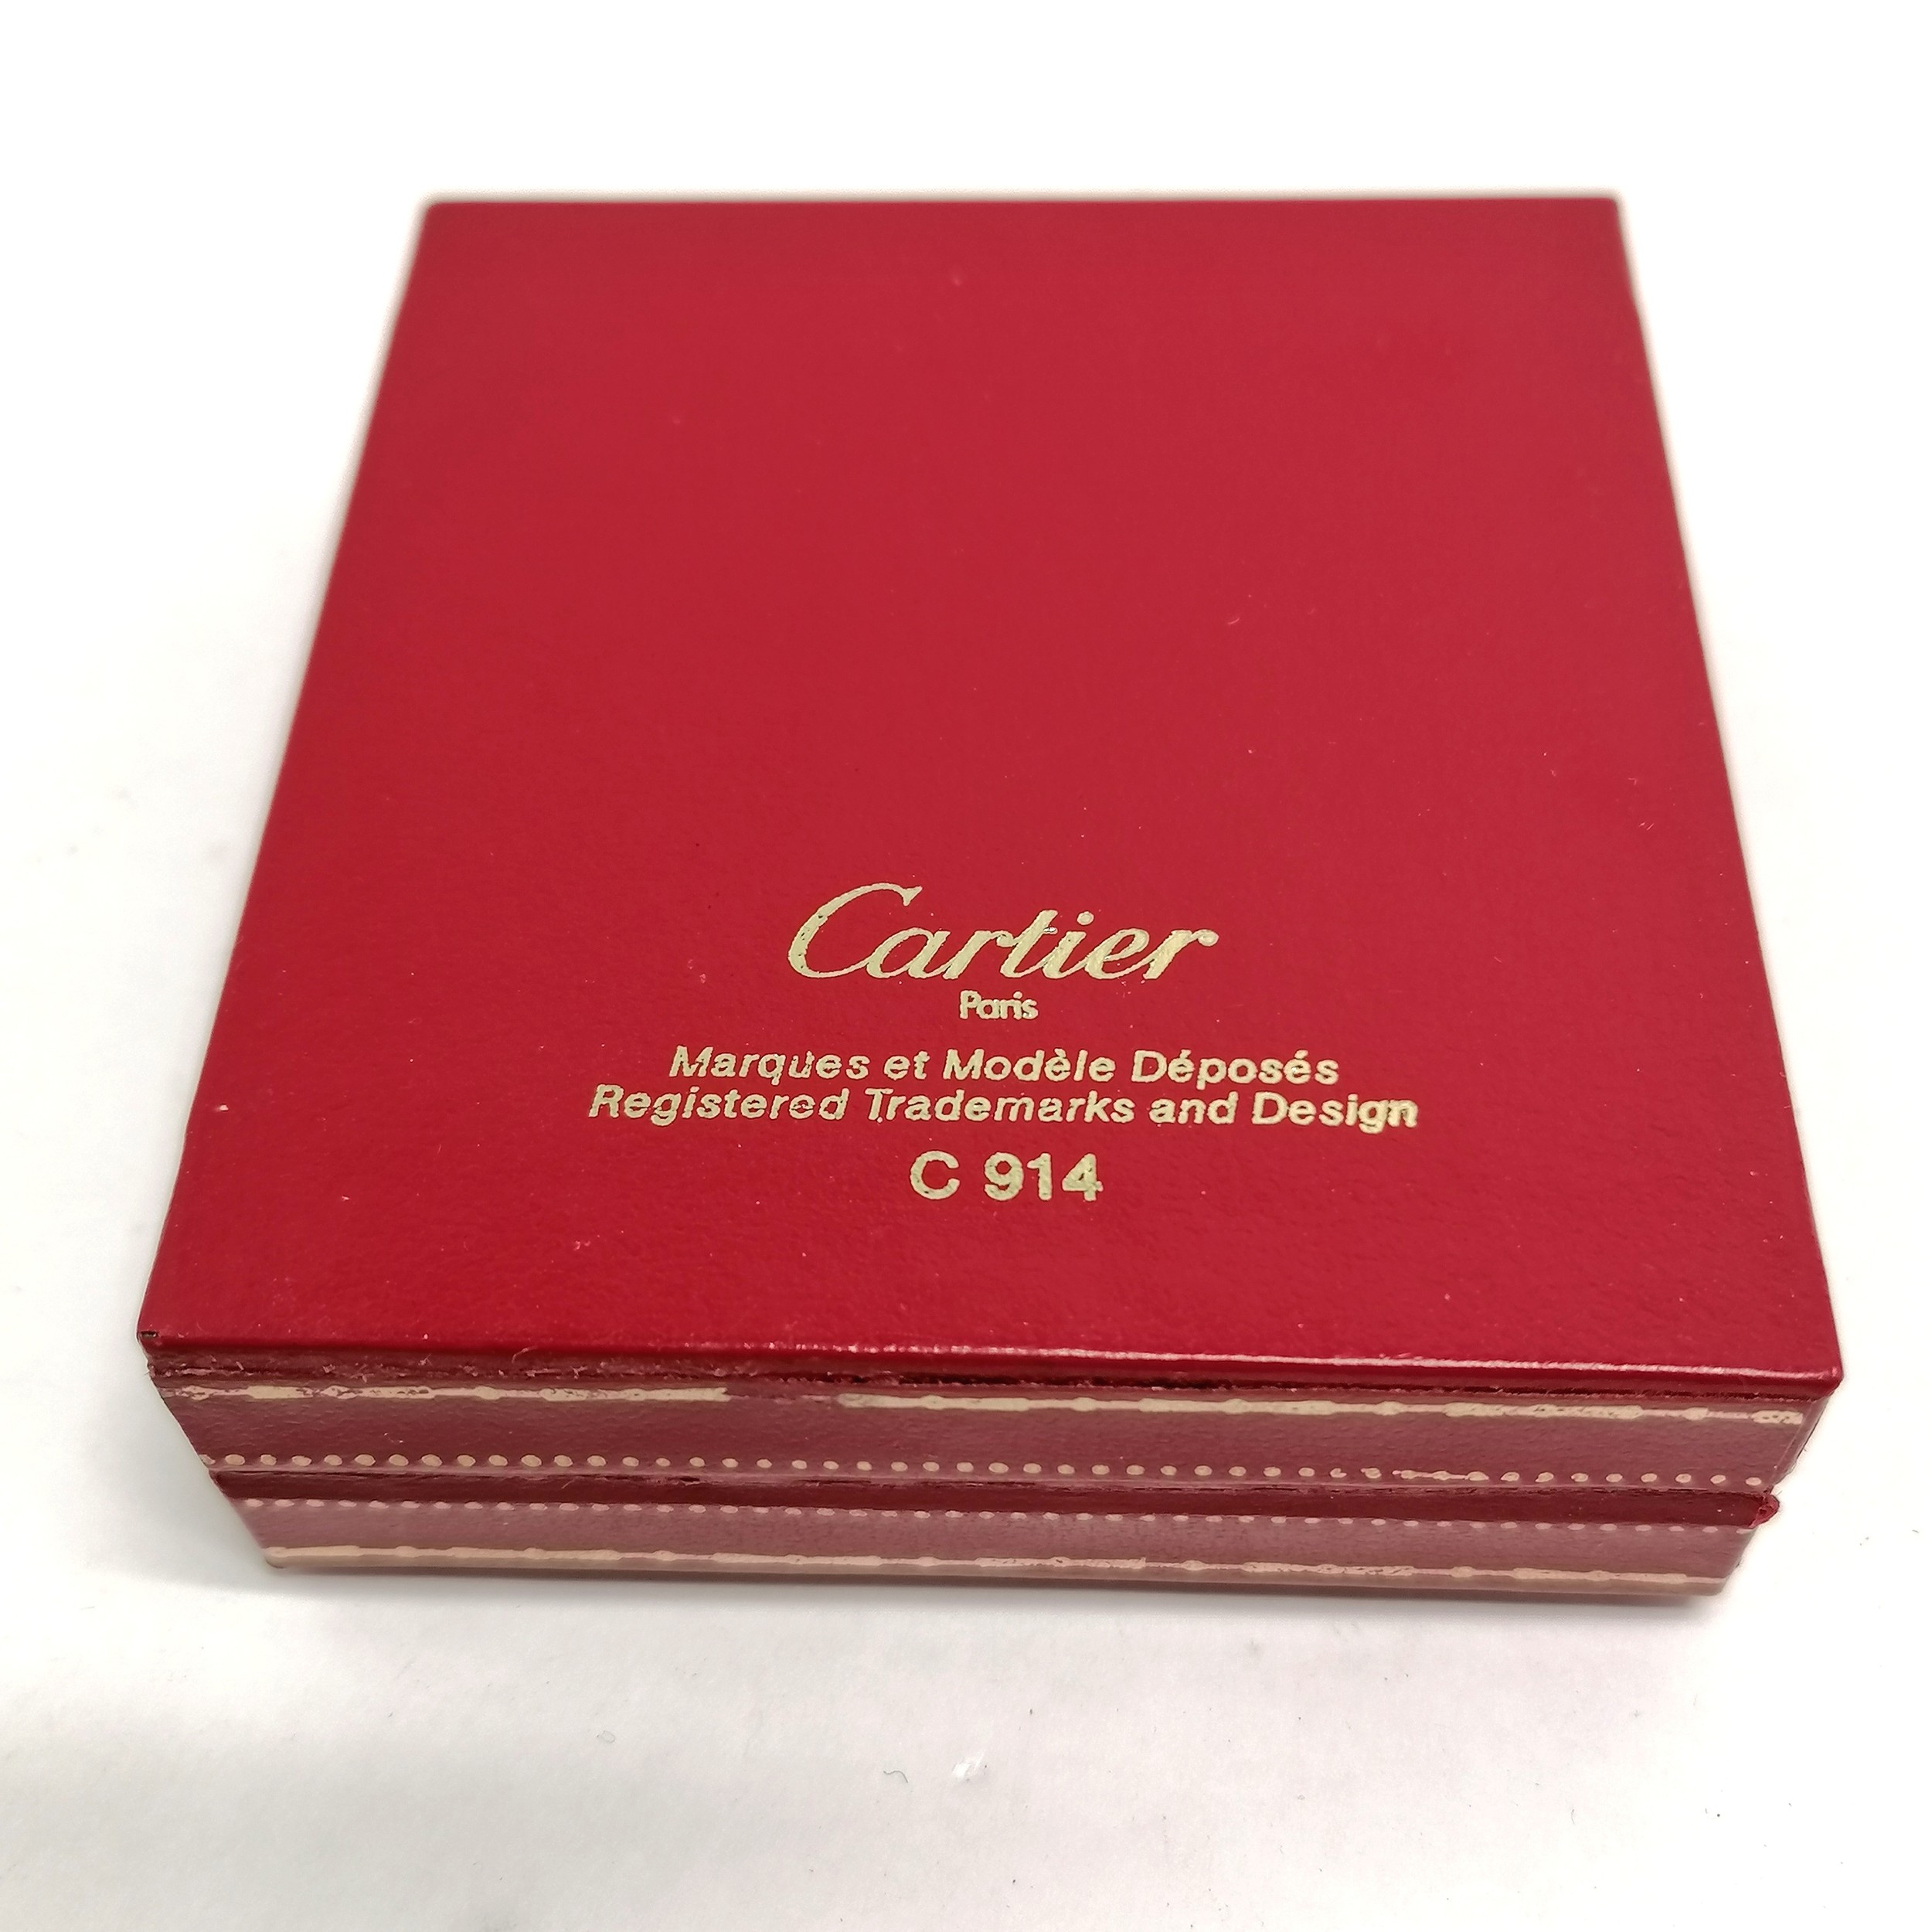 Must De Cartier red leather retail box 7cm x 7.8cm x 2cm T\w a red suede fashion pouch - Image 2 of 3